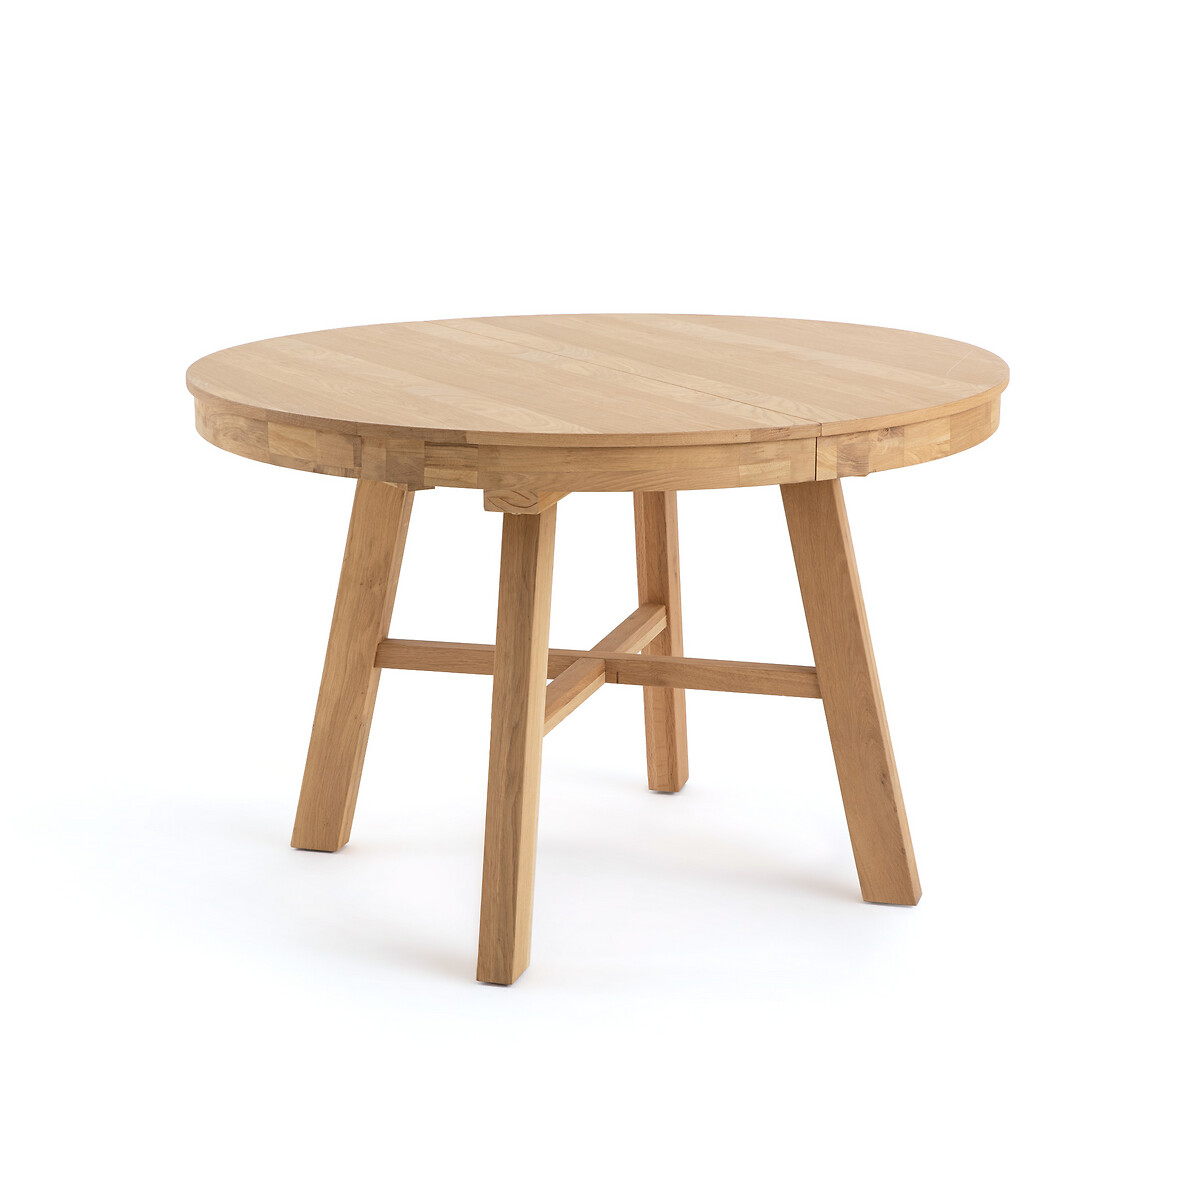 Zebarn Extendable Round Dining Table (Seats 4-8)